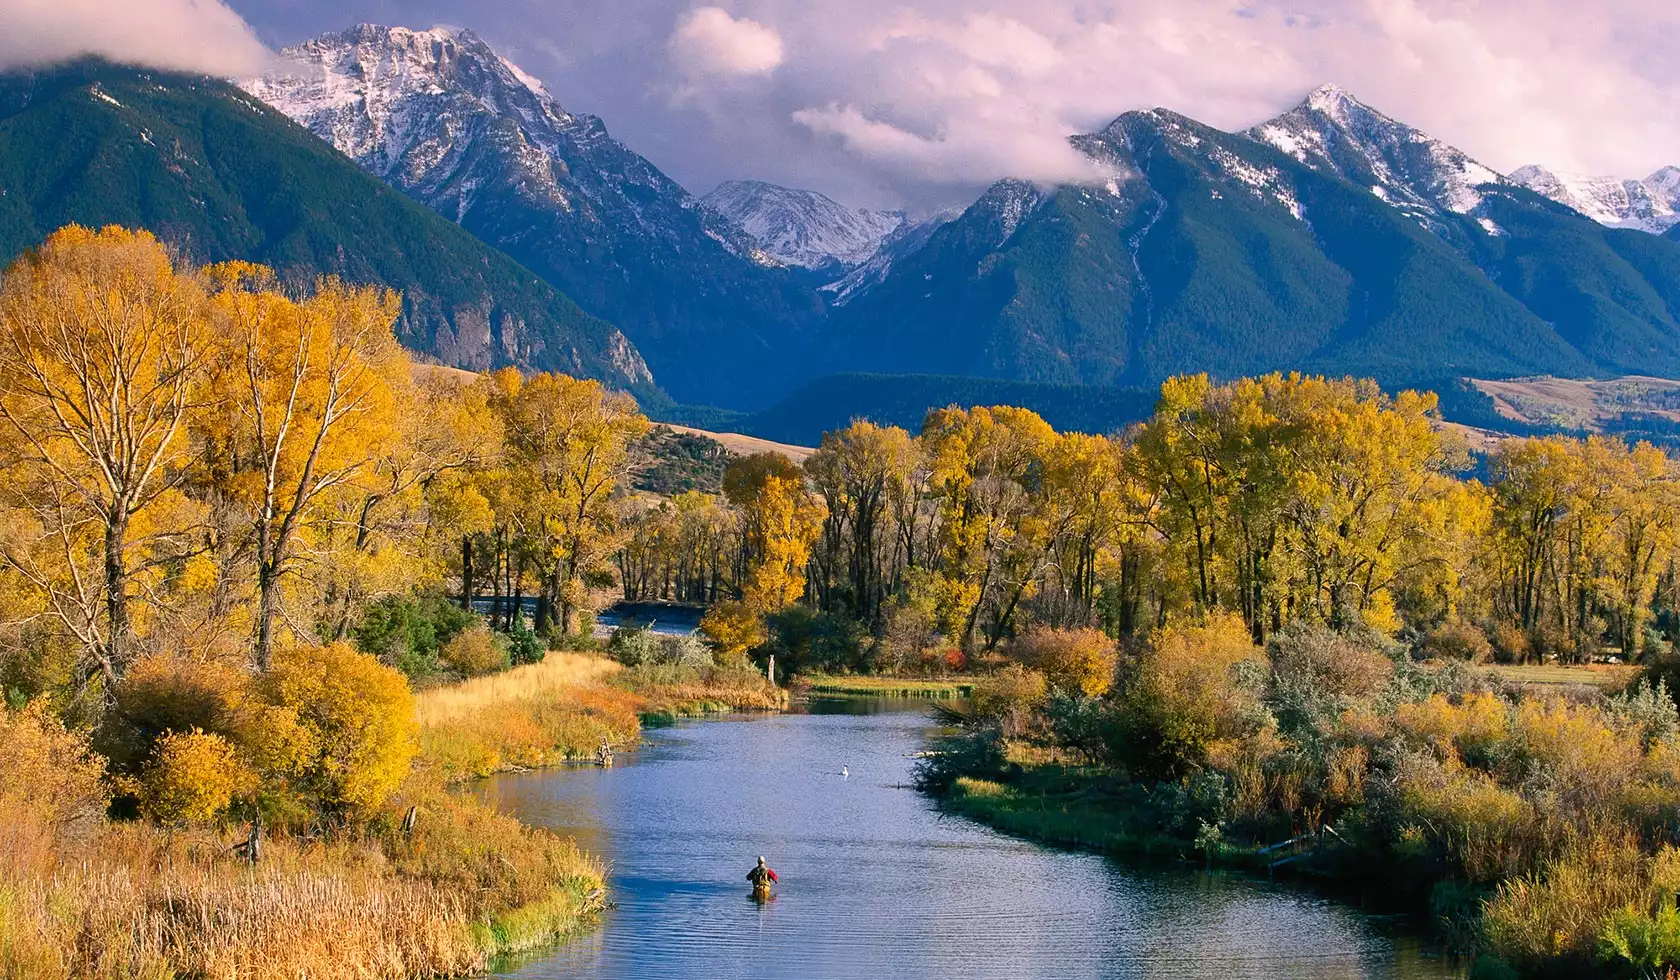 best places to visit and stay in montana